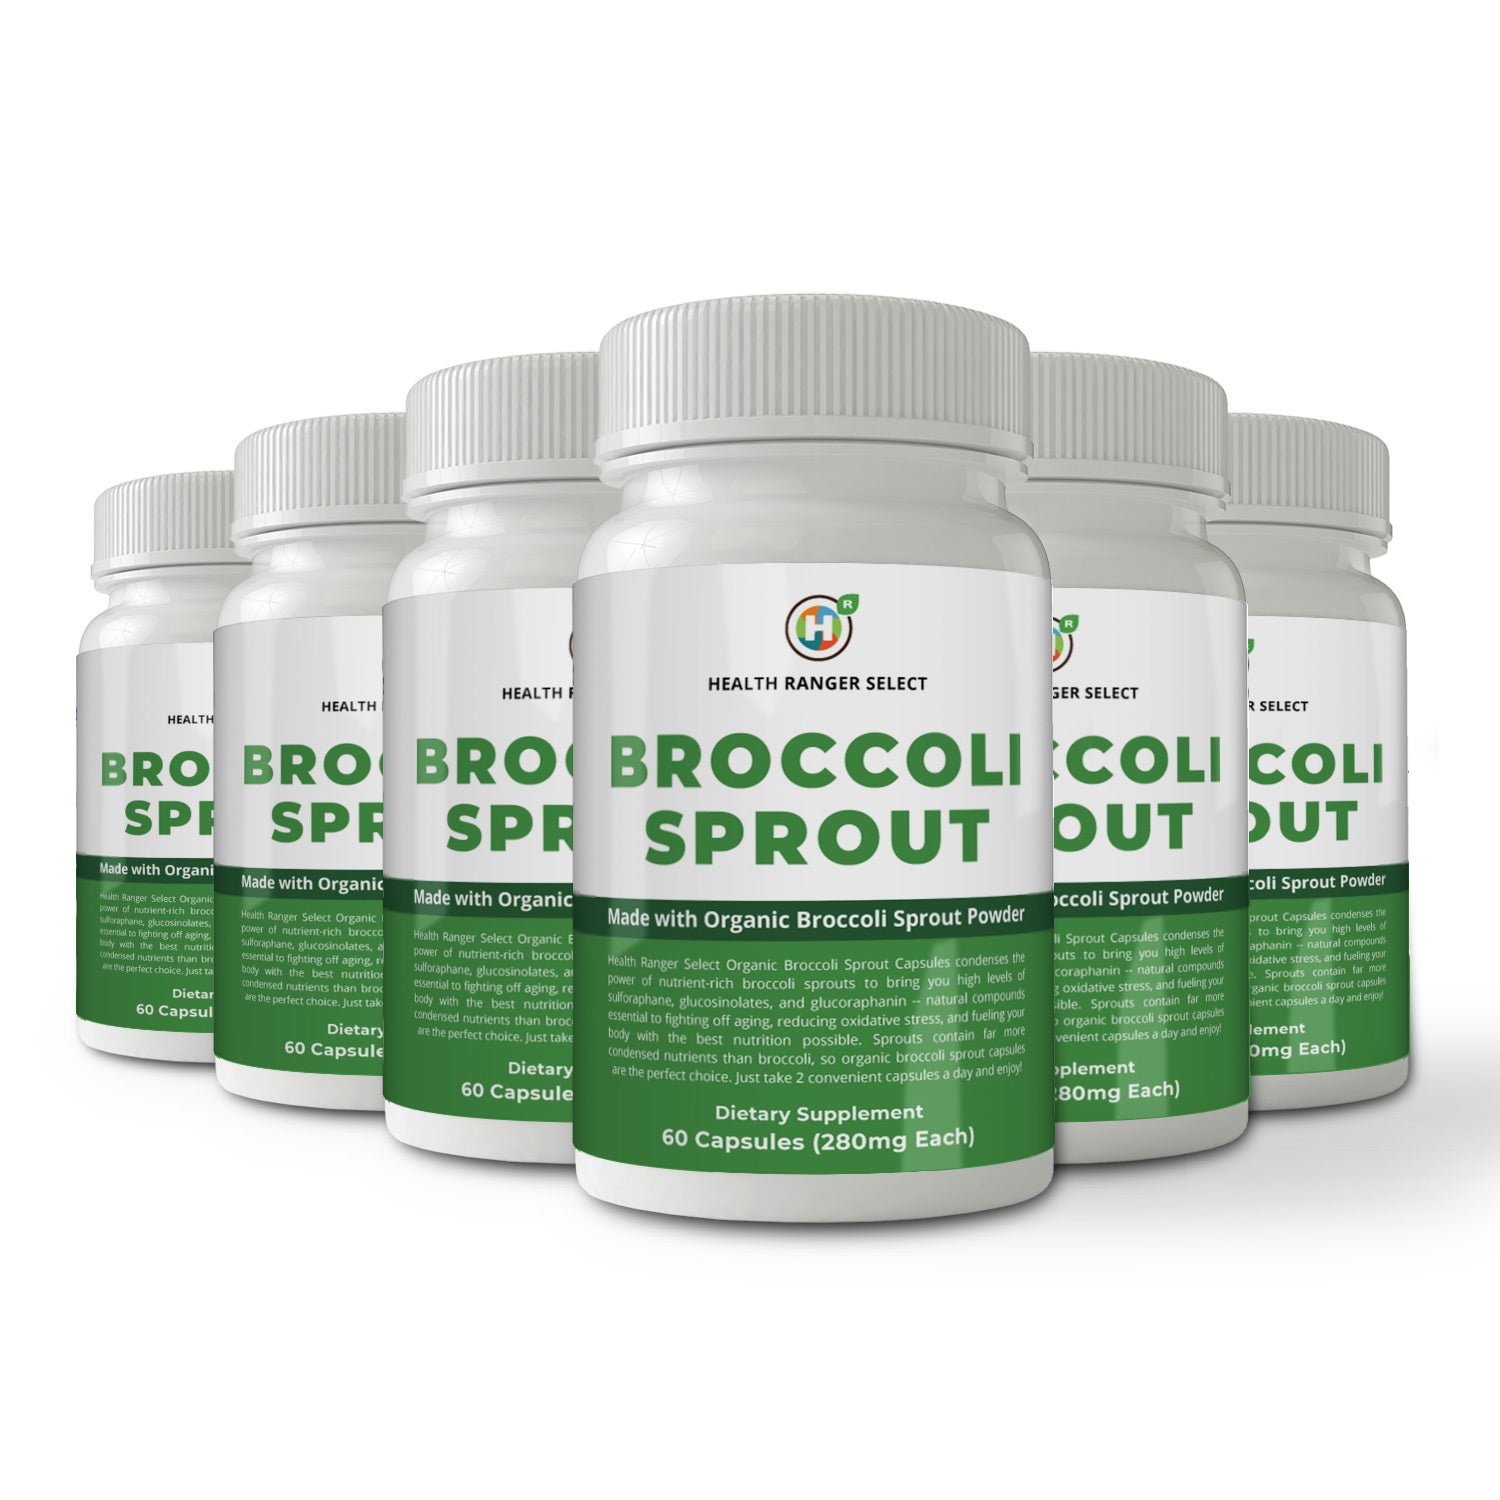 Broccoli Sprouts - 60 capsules - with Organic Broccoli Sprout Powder (6-Pack)